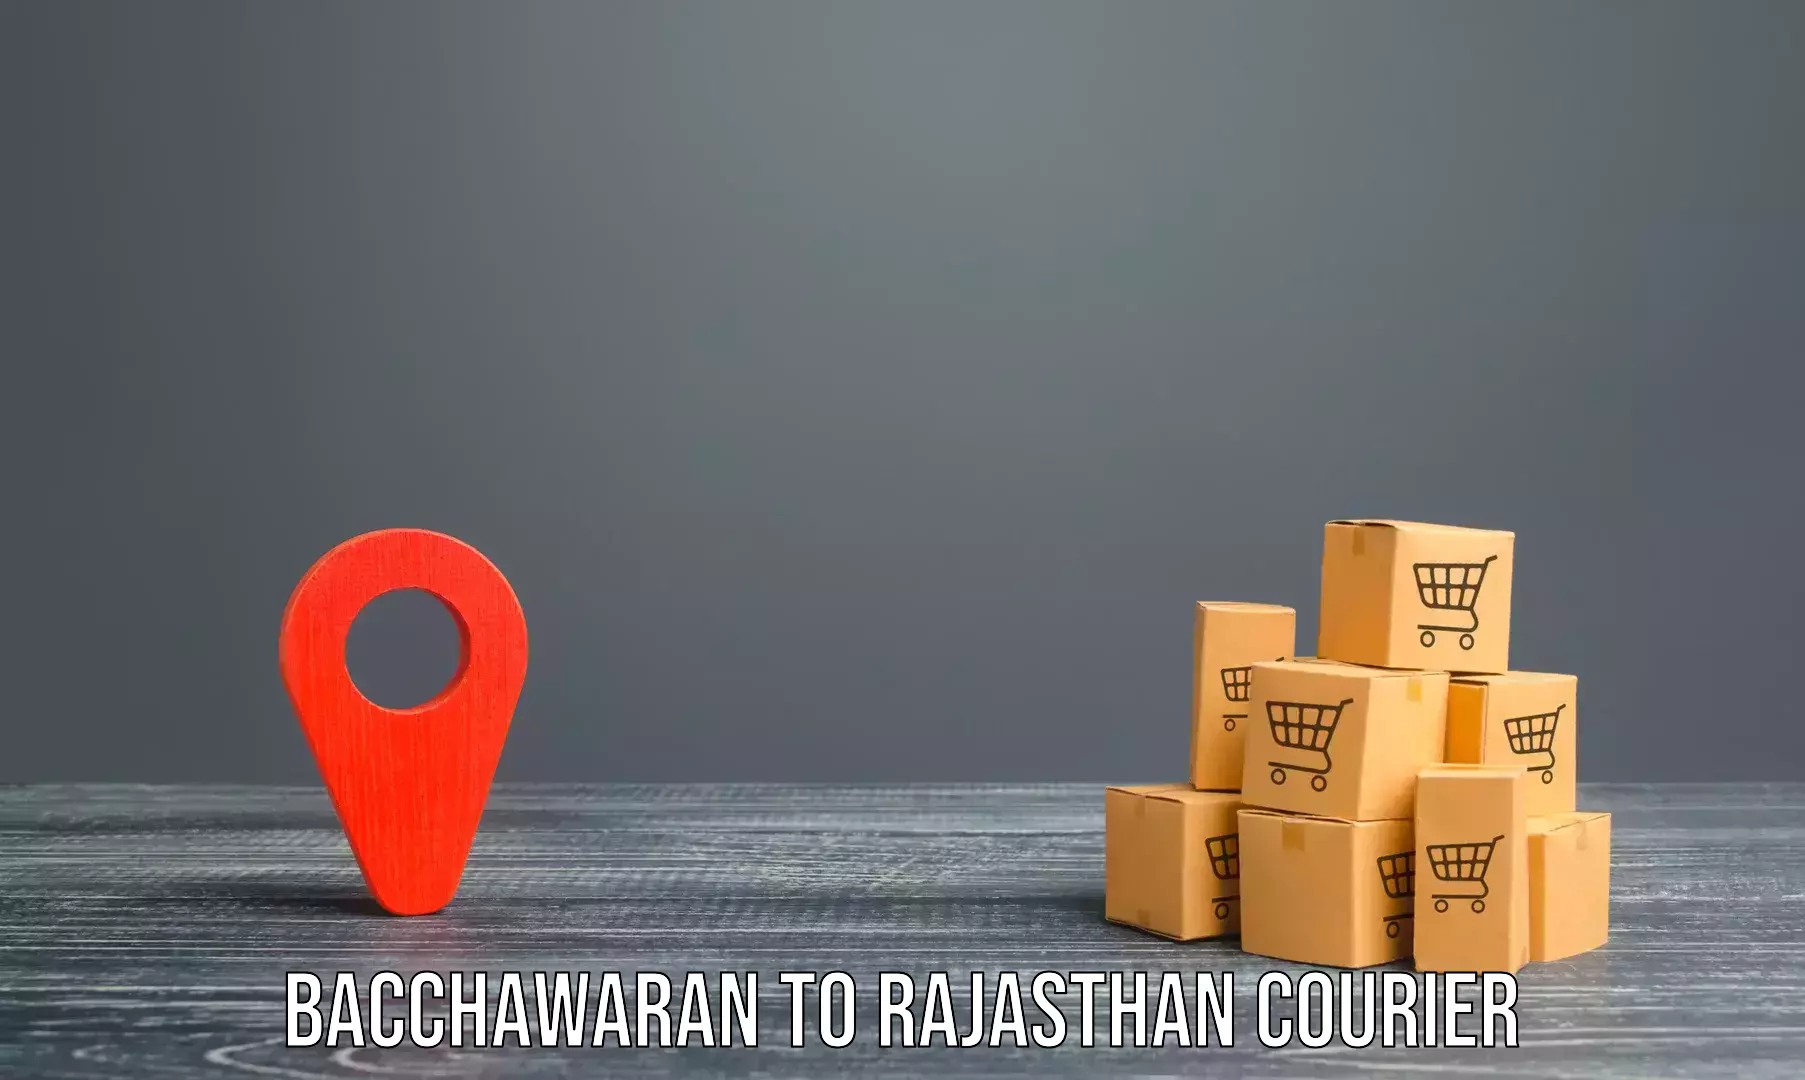 Home moving specialists in Bacchawaran to Pokhran